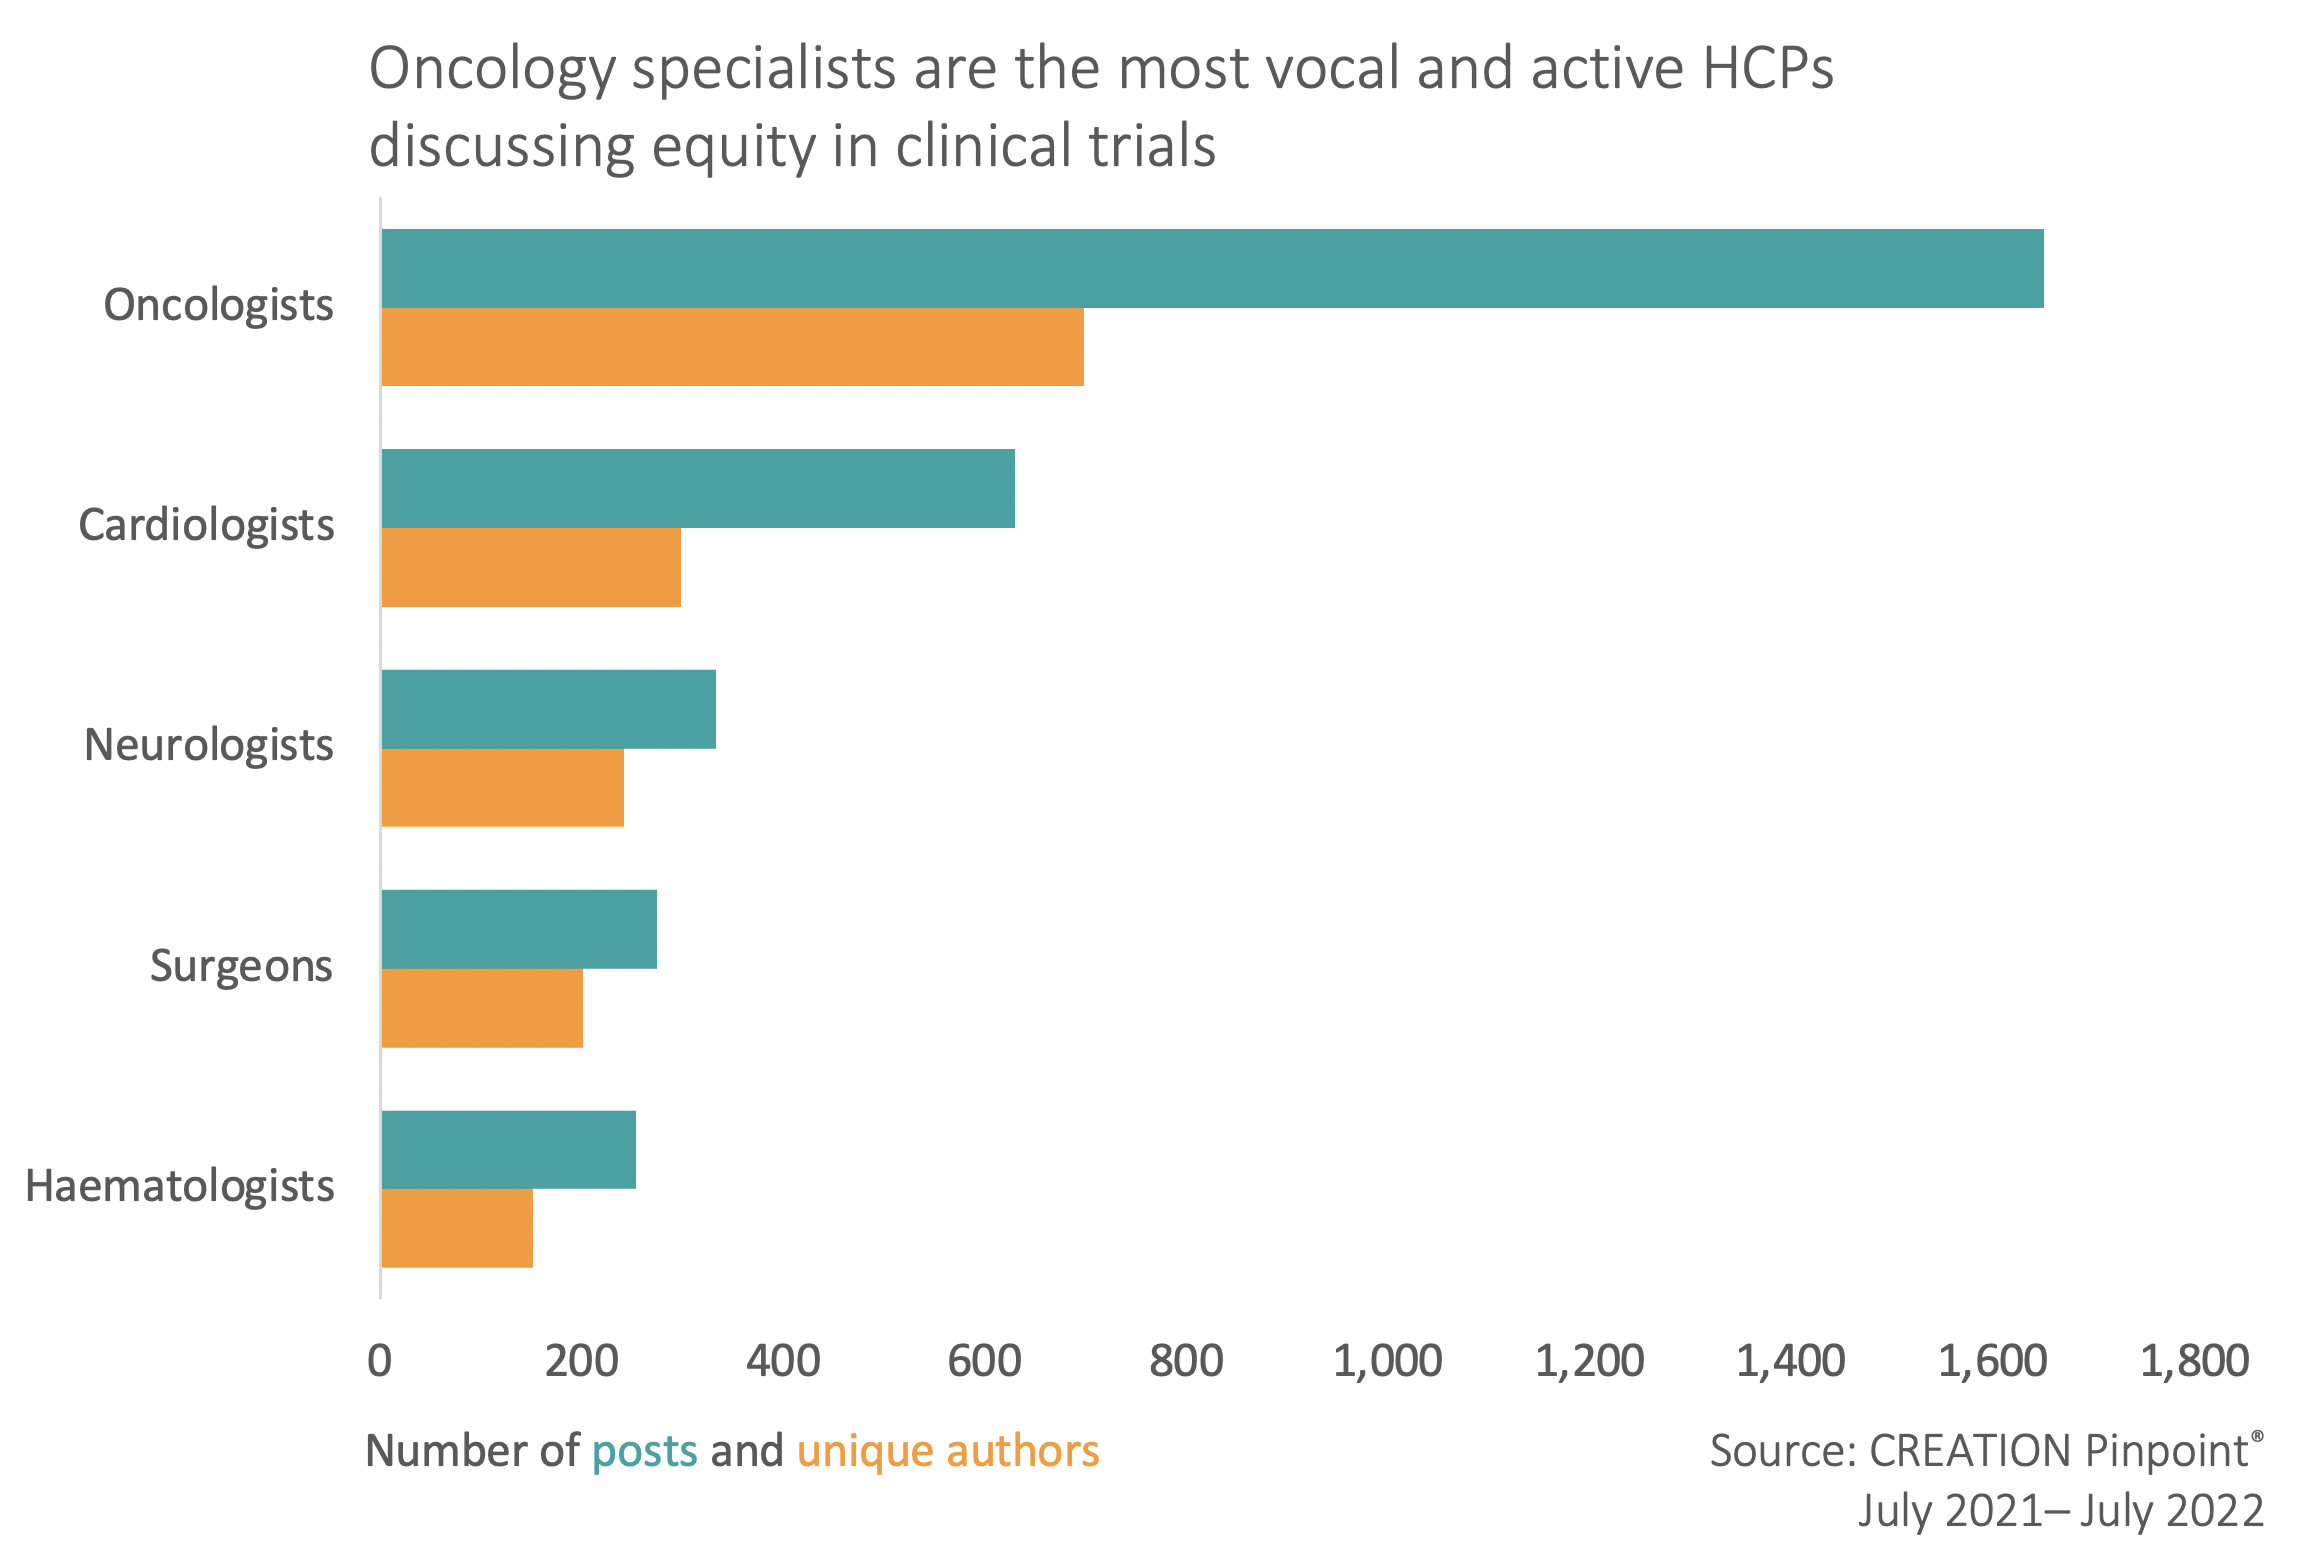 A graph showing the most vocal oncologists discussing clinical trials